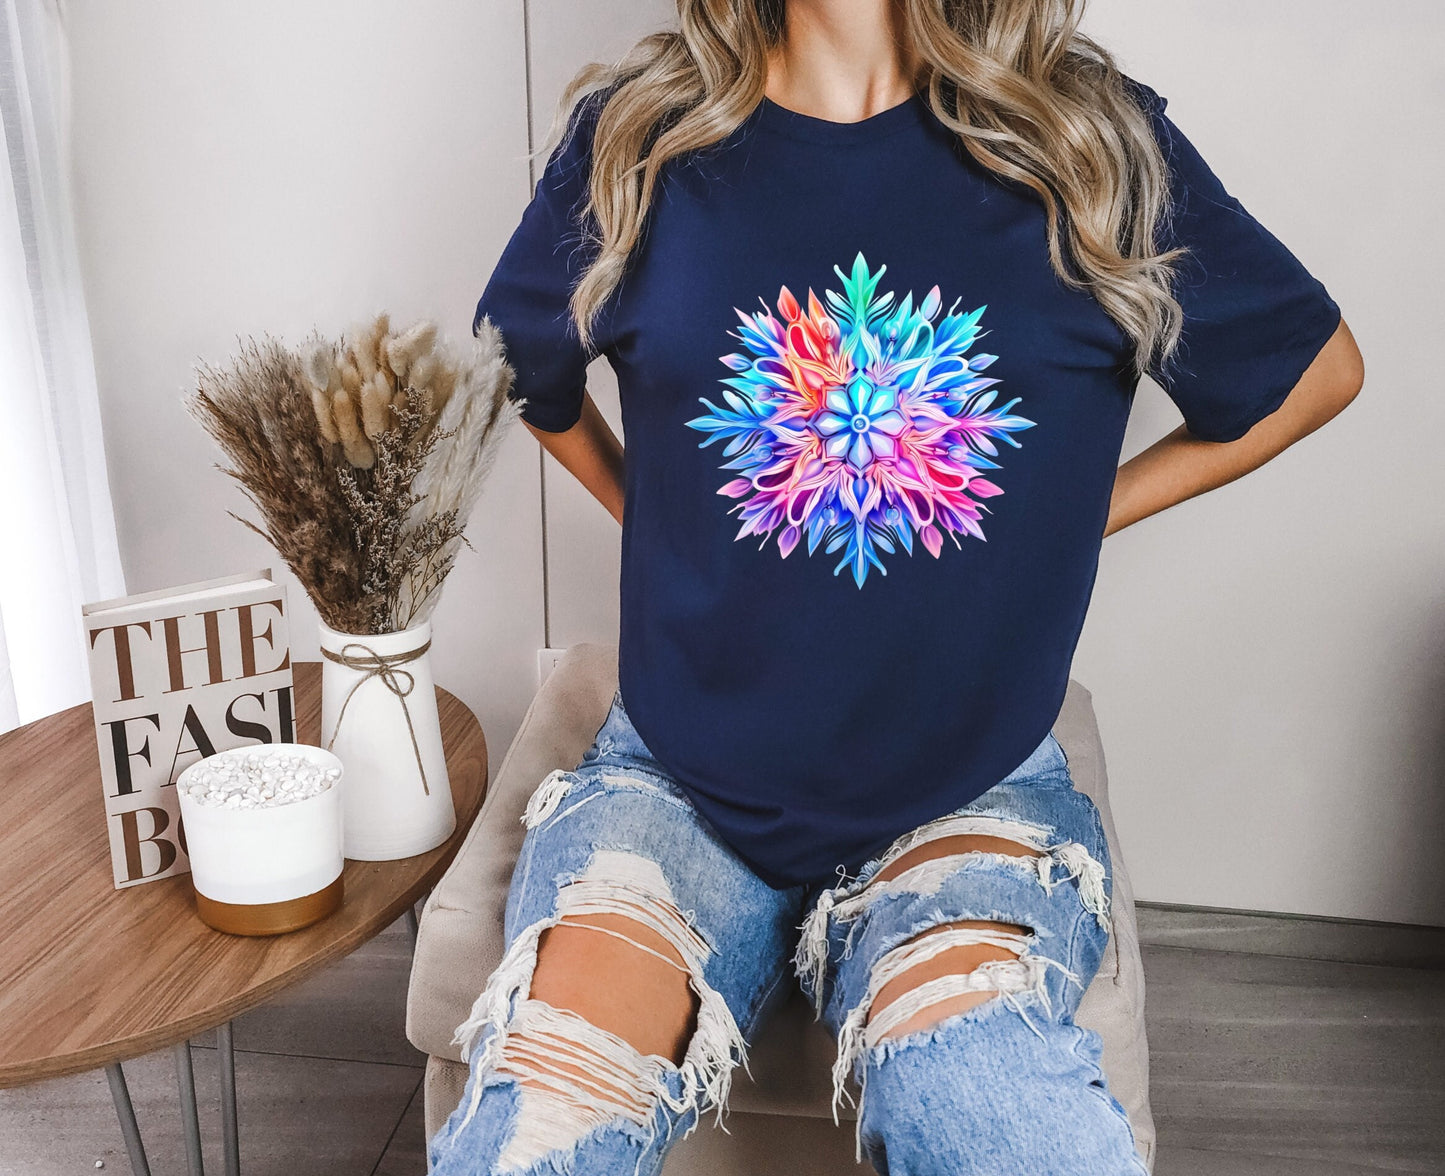 Snow Flake Christmas T-Shirt, Perfect Holiday Cheer Tee, Gift Shirt for Christmas Spirit, Cute Xmas Shirt for Family and friends